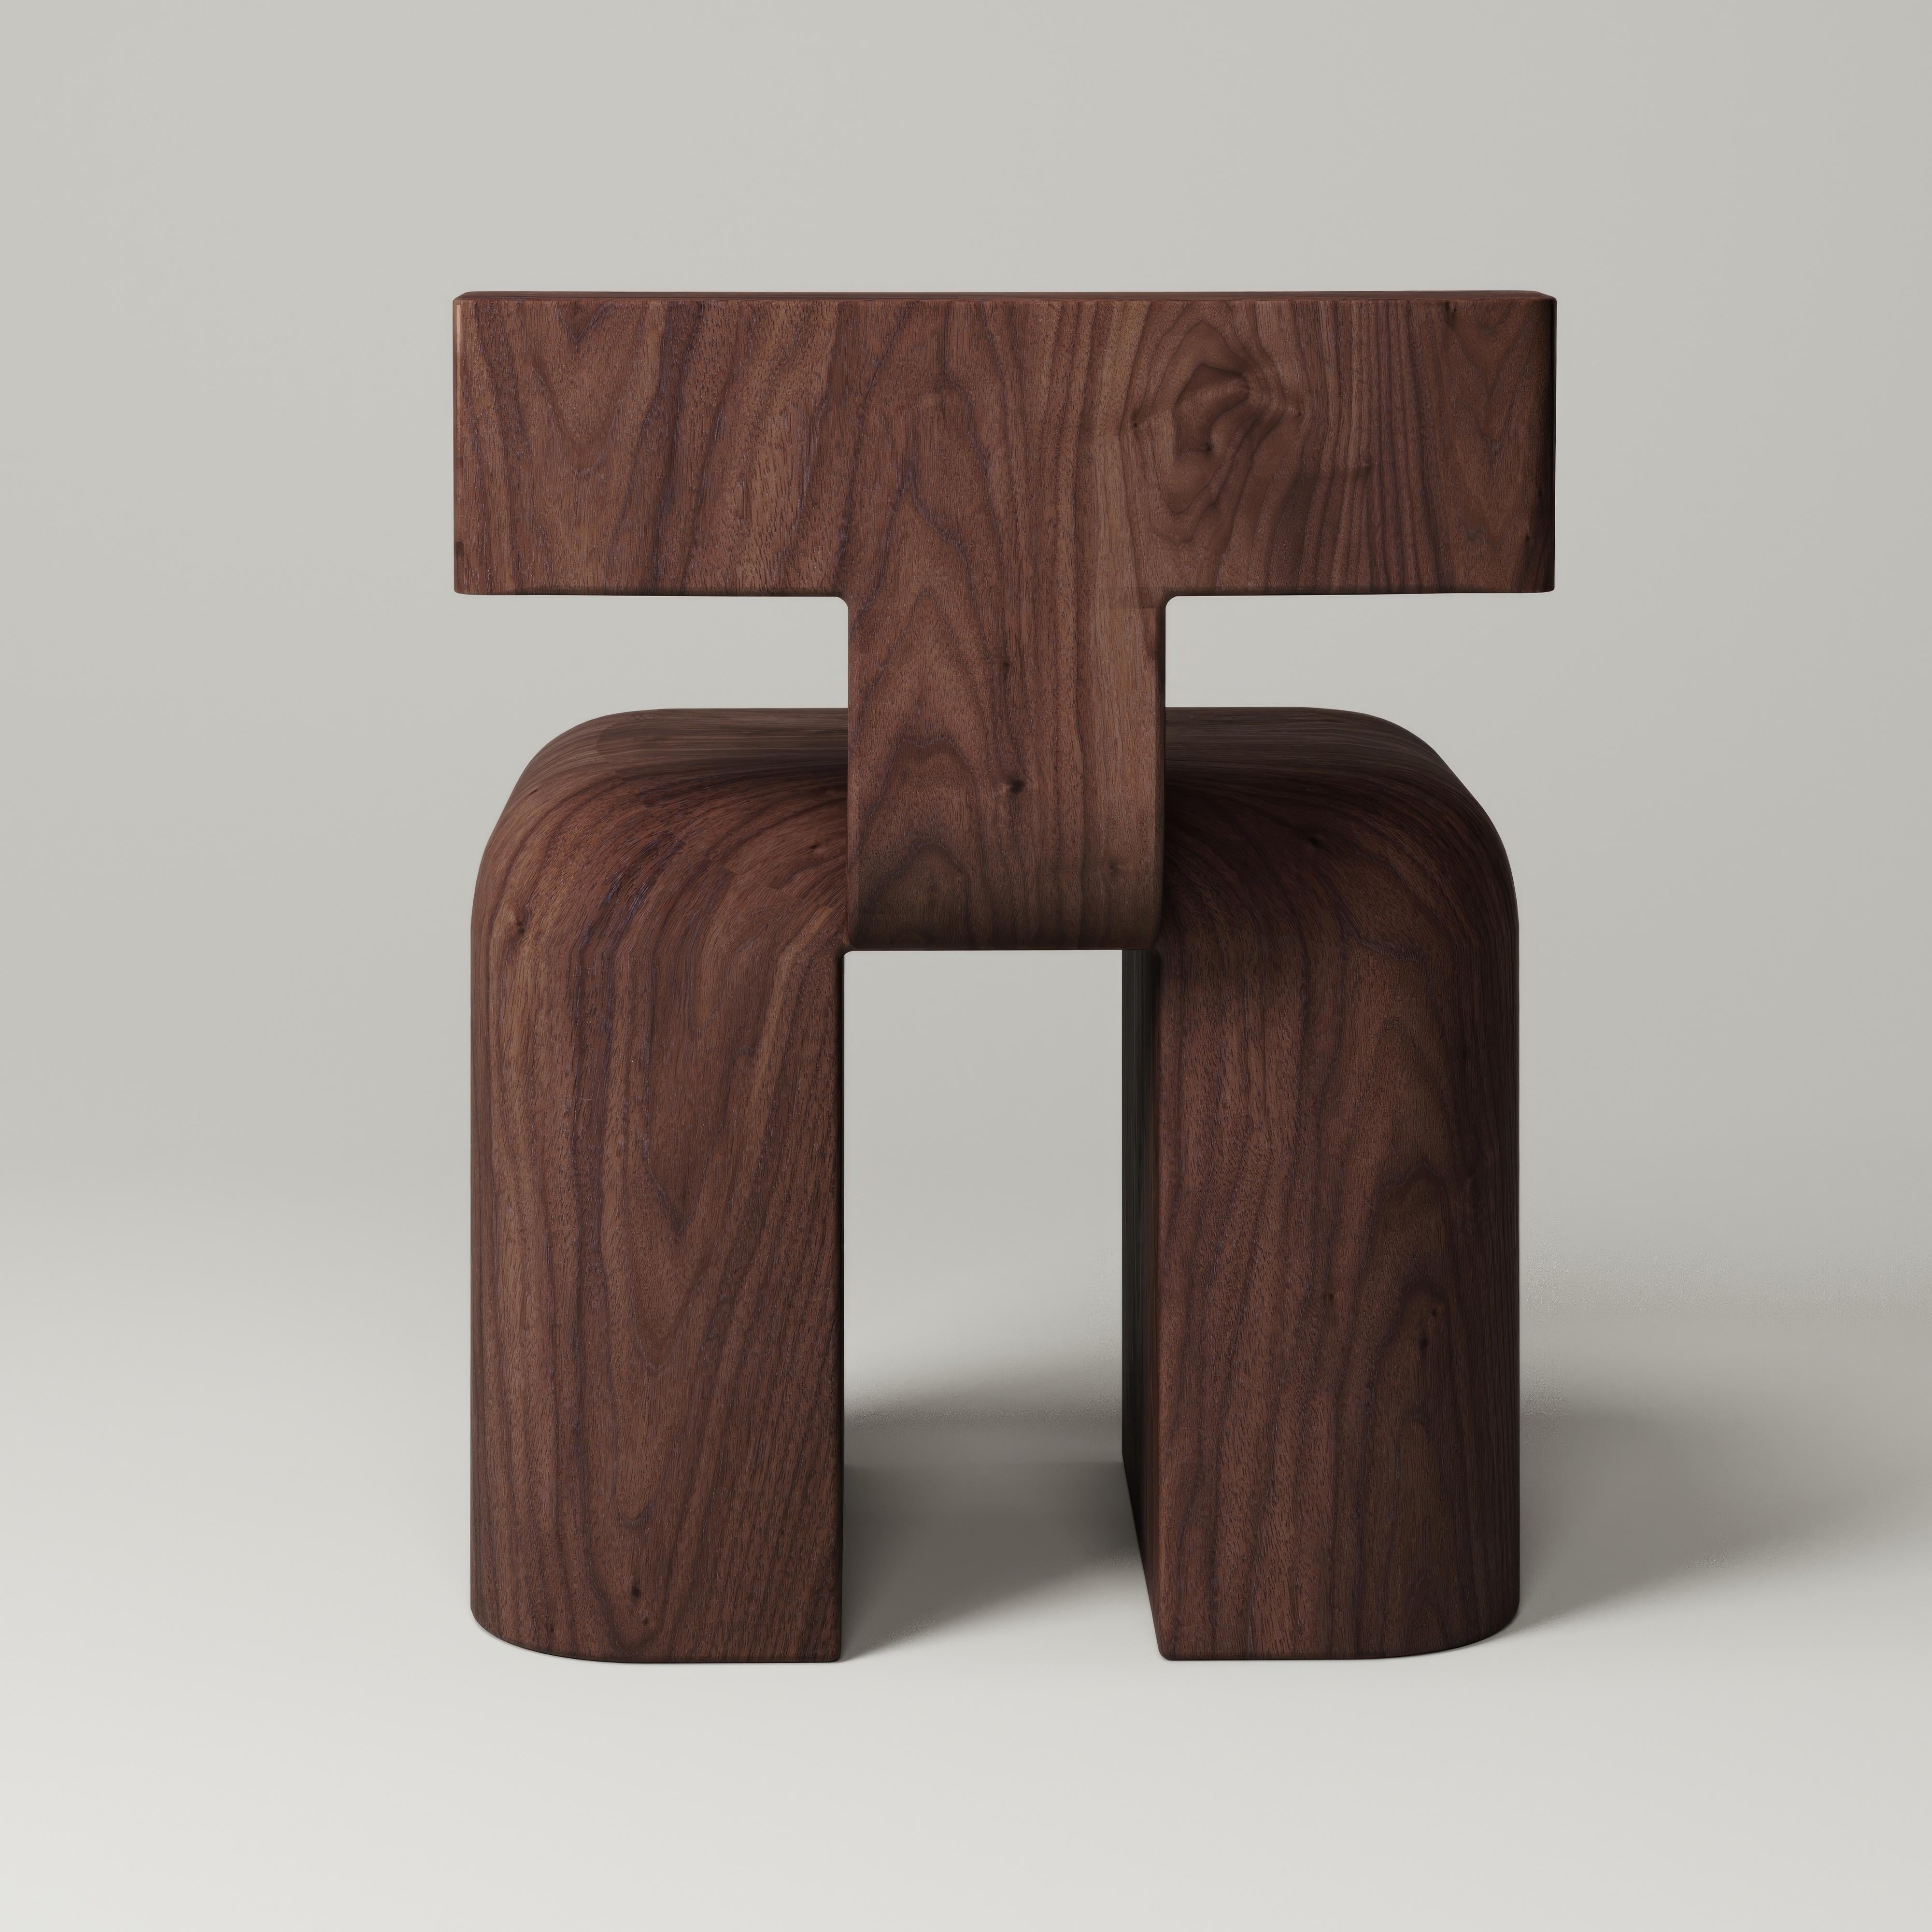 The M_013 Chair is softly carved from solid walnut. It's heavily proportioned base and sculptural form make this chair a unique addition to any interior. 

NYC-based design studio Monolith focuses on collectible furniture and homeware by exalting